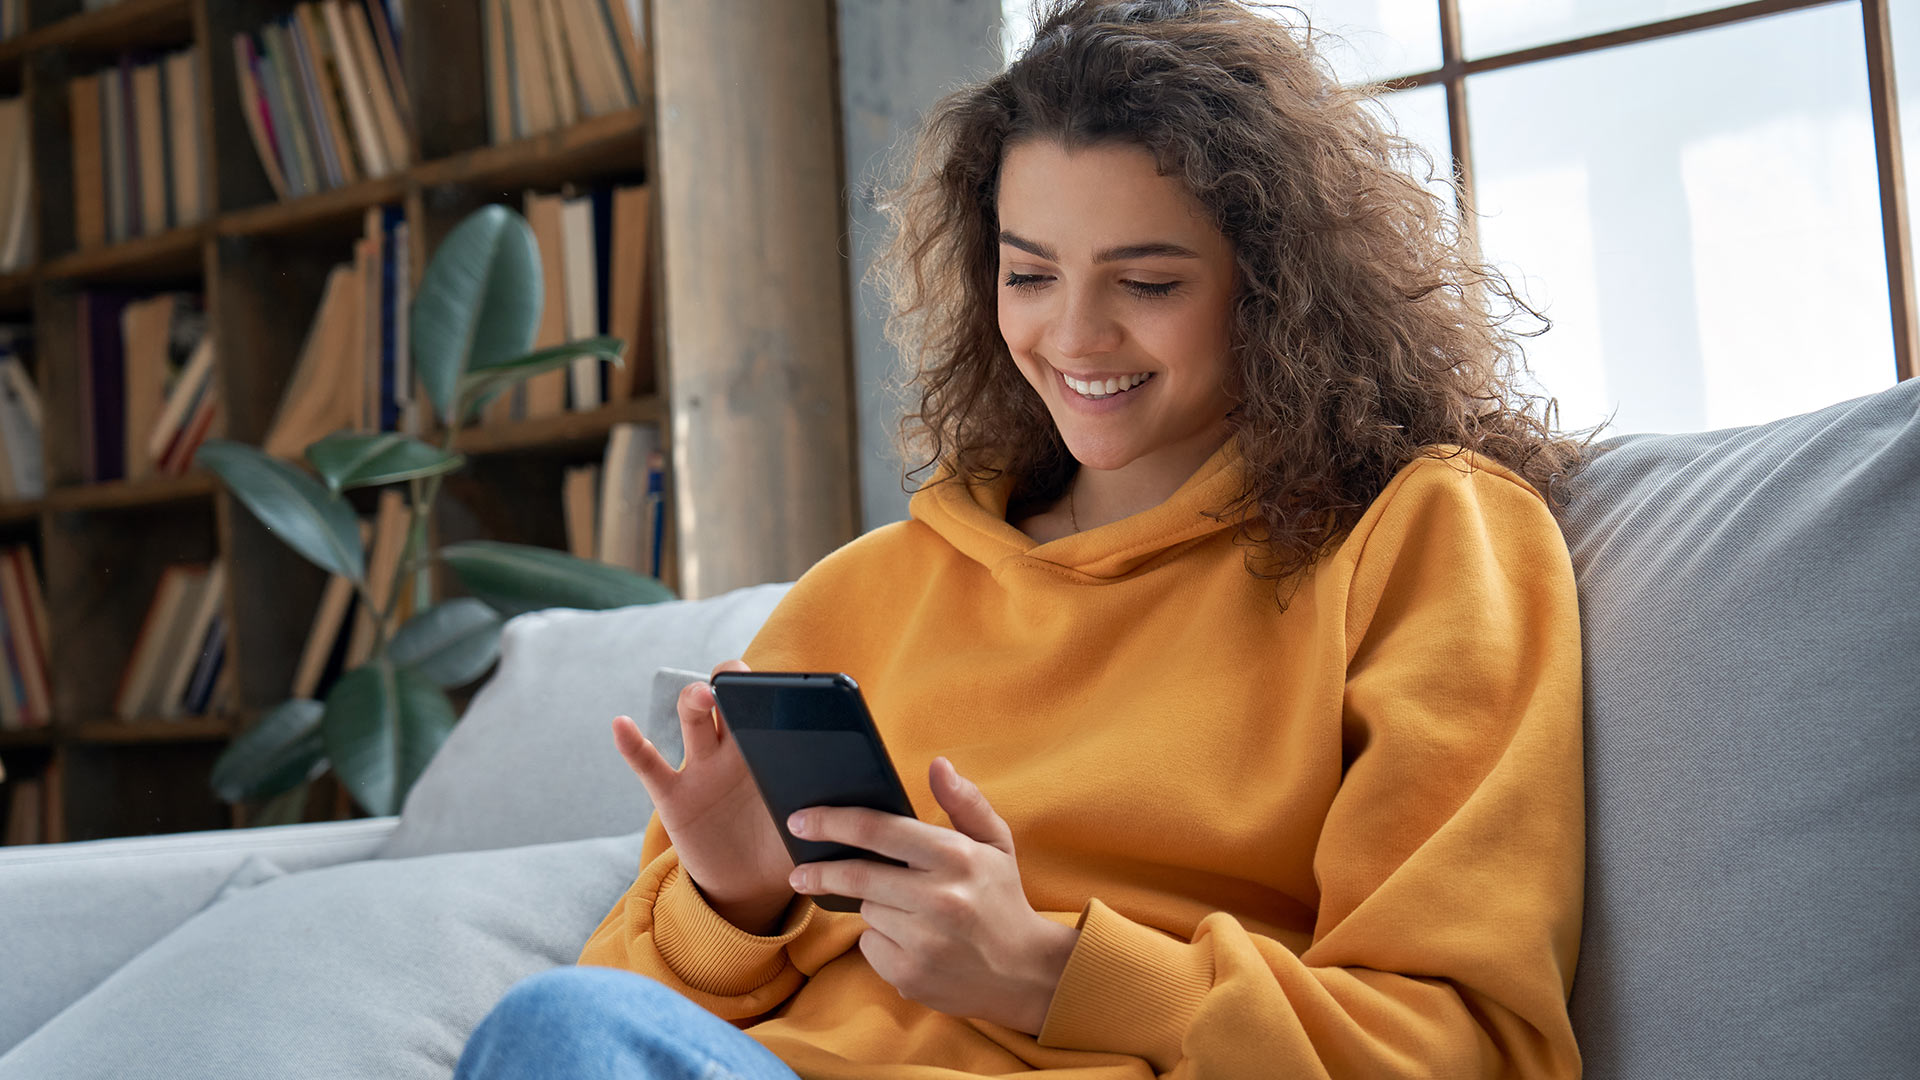 Brunette woman in yellow hoodie sitting down on a grey couch and looking at her phone while smiling.